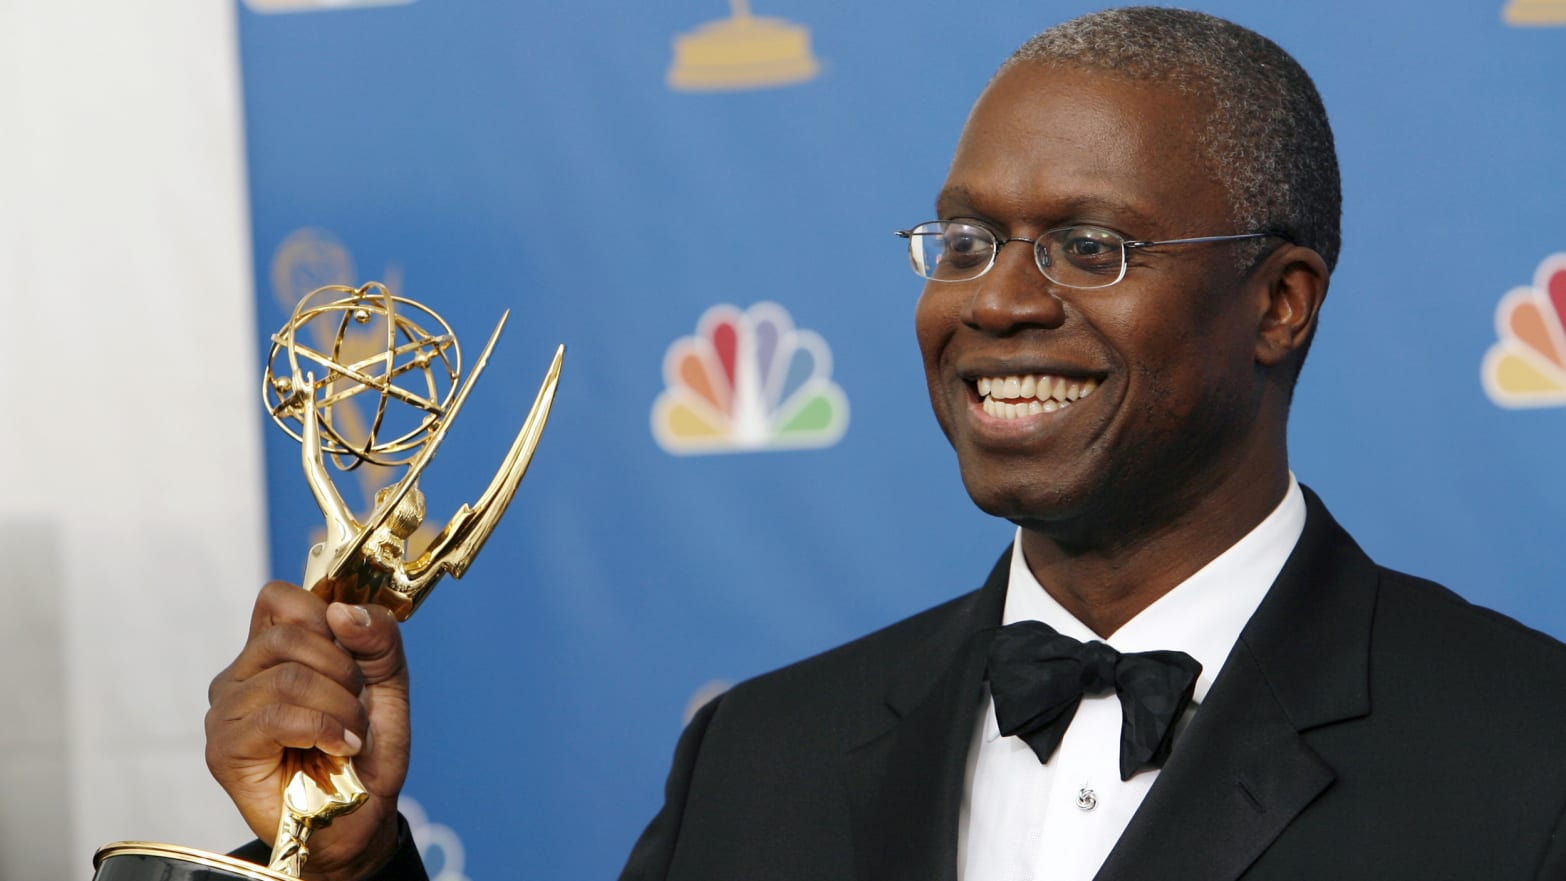 Andre Braugher poses after winning an Emmy for outstanding lead actor in a miniseries or movie